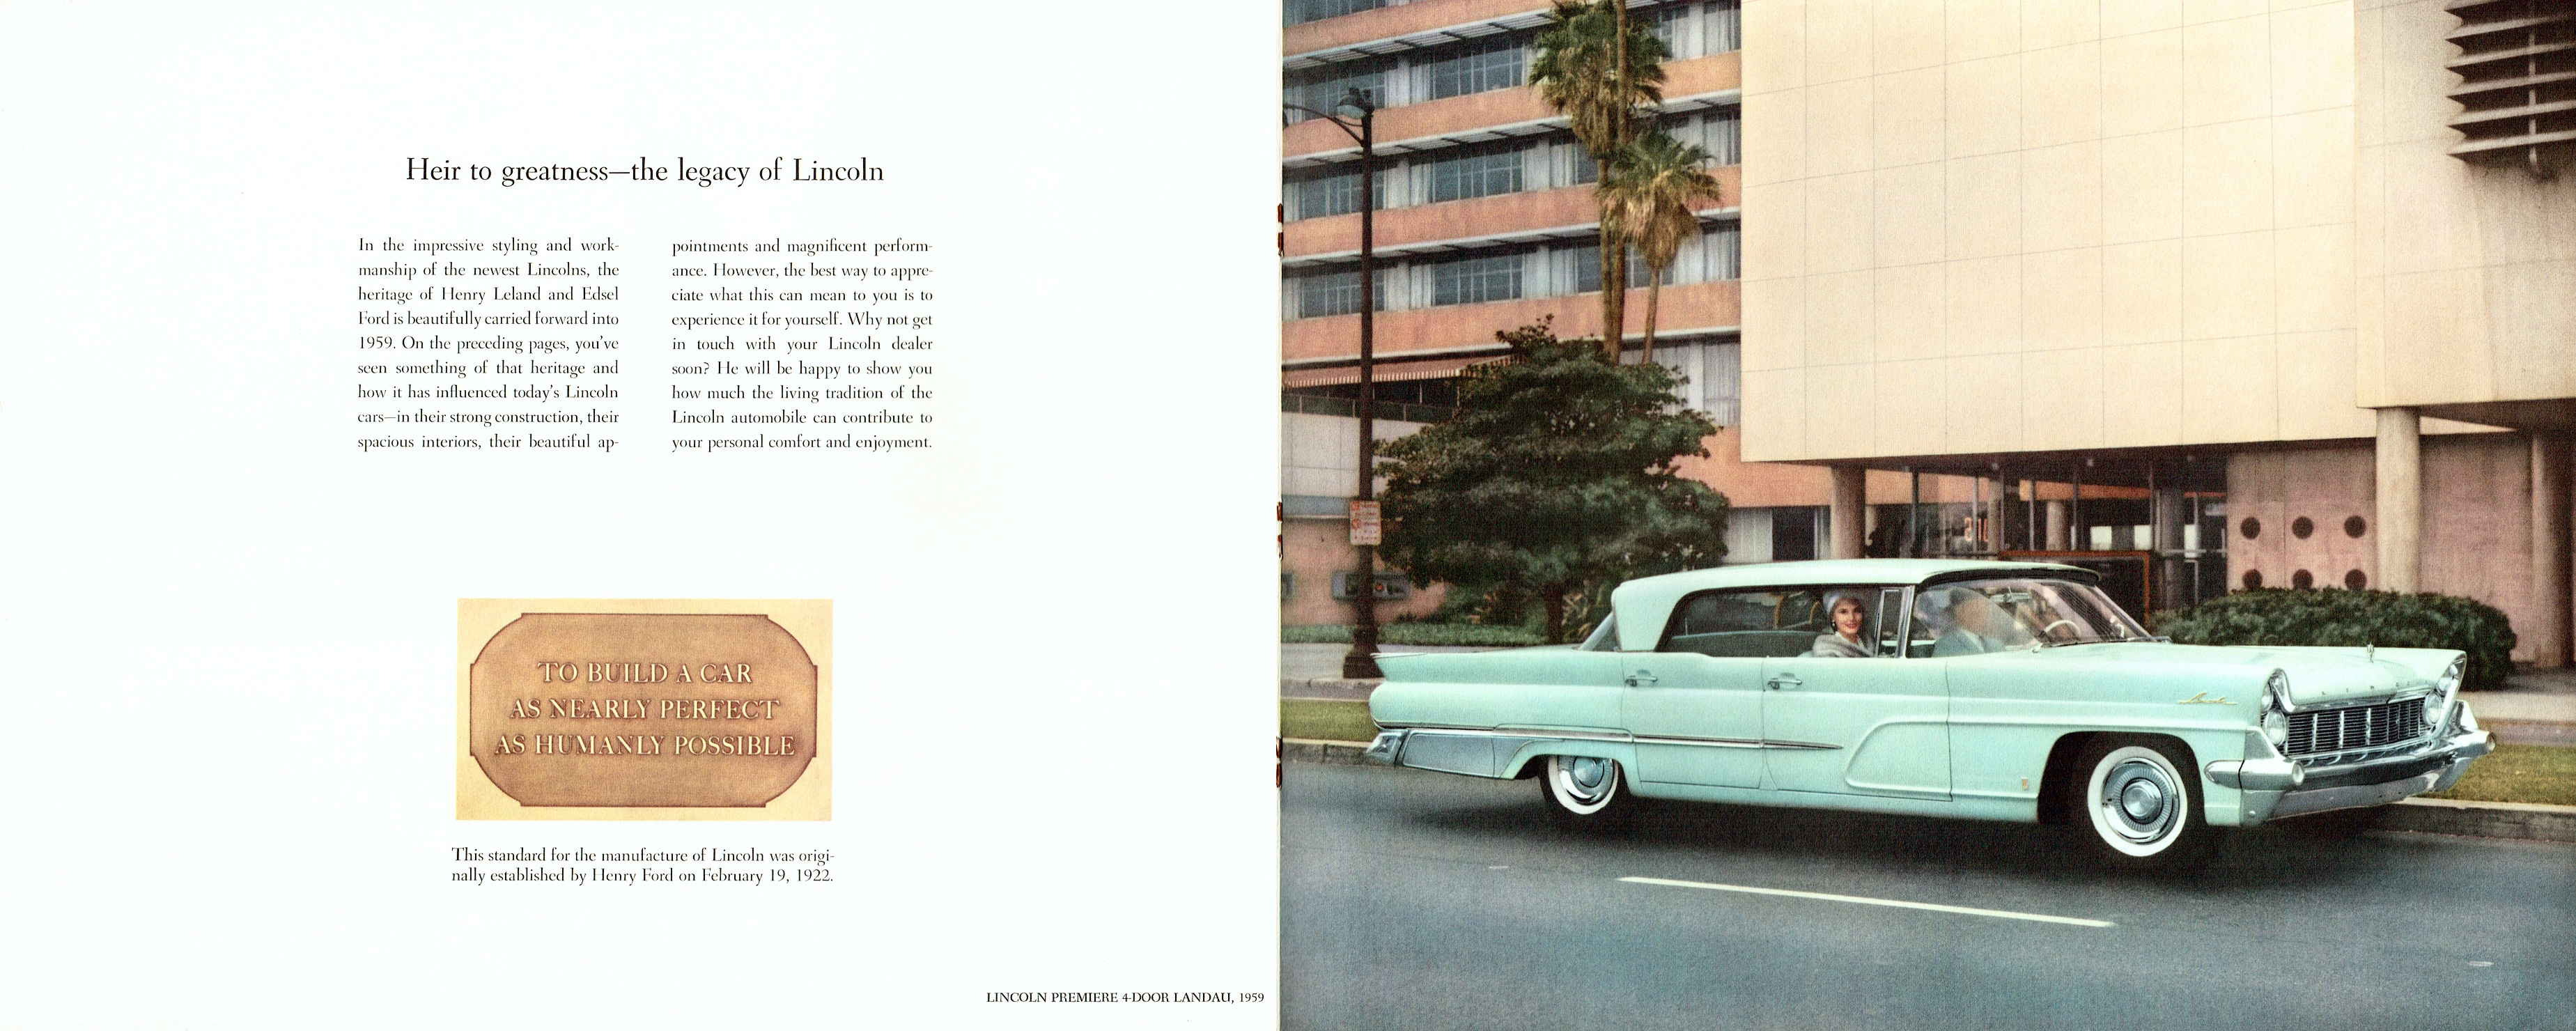 1959_Lincoln_Mailer-10-11